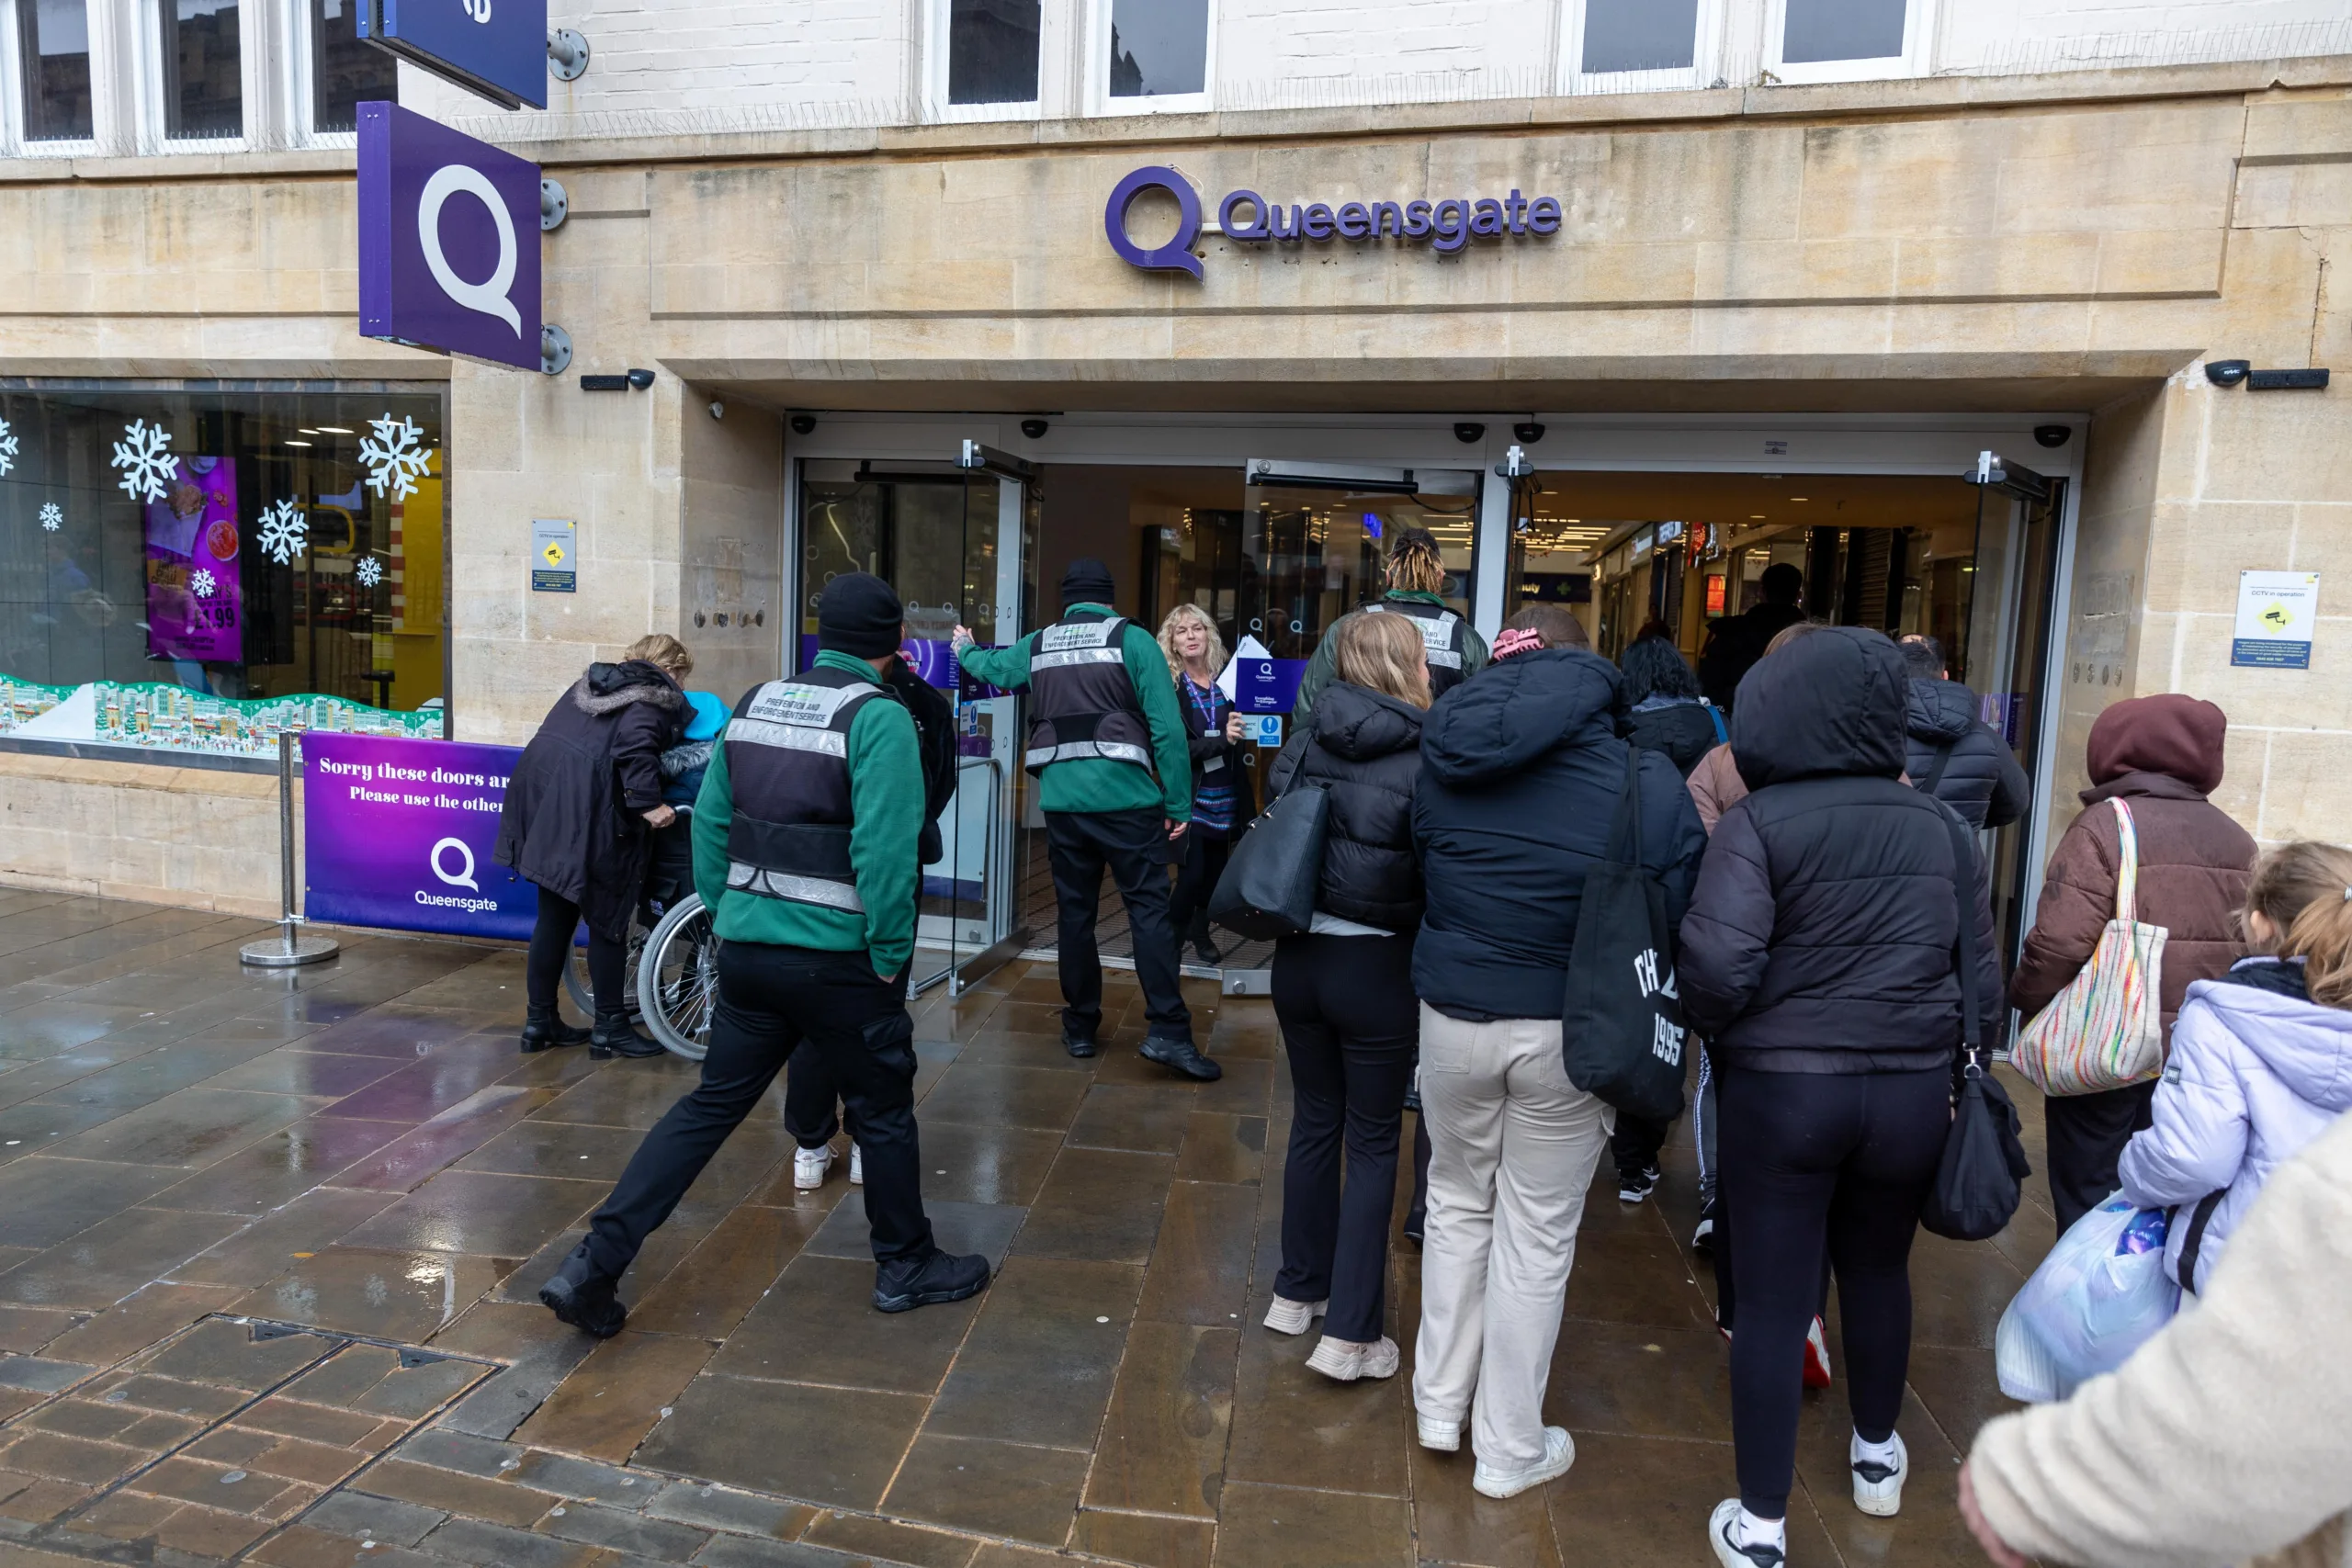 Queensgate shopping centre, Peterborough, evacuated after security threat, now allowing customers back in. PHOTO: Terry Harris for CambsNews